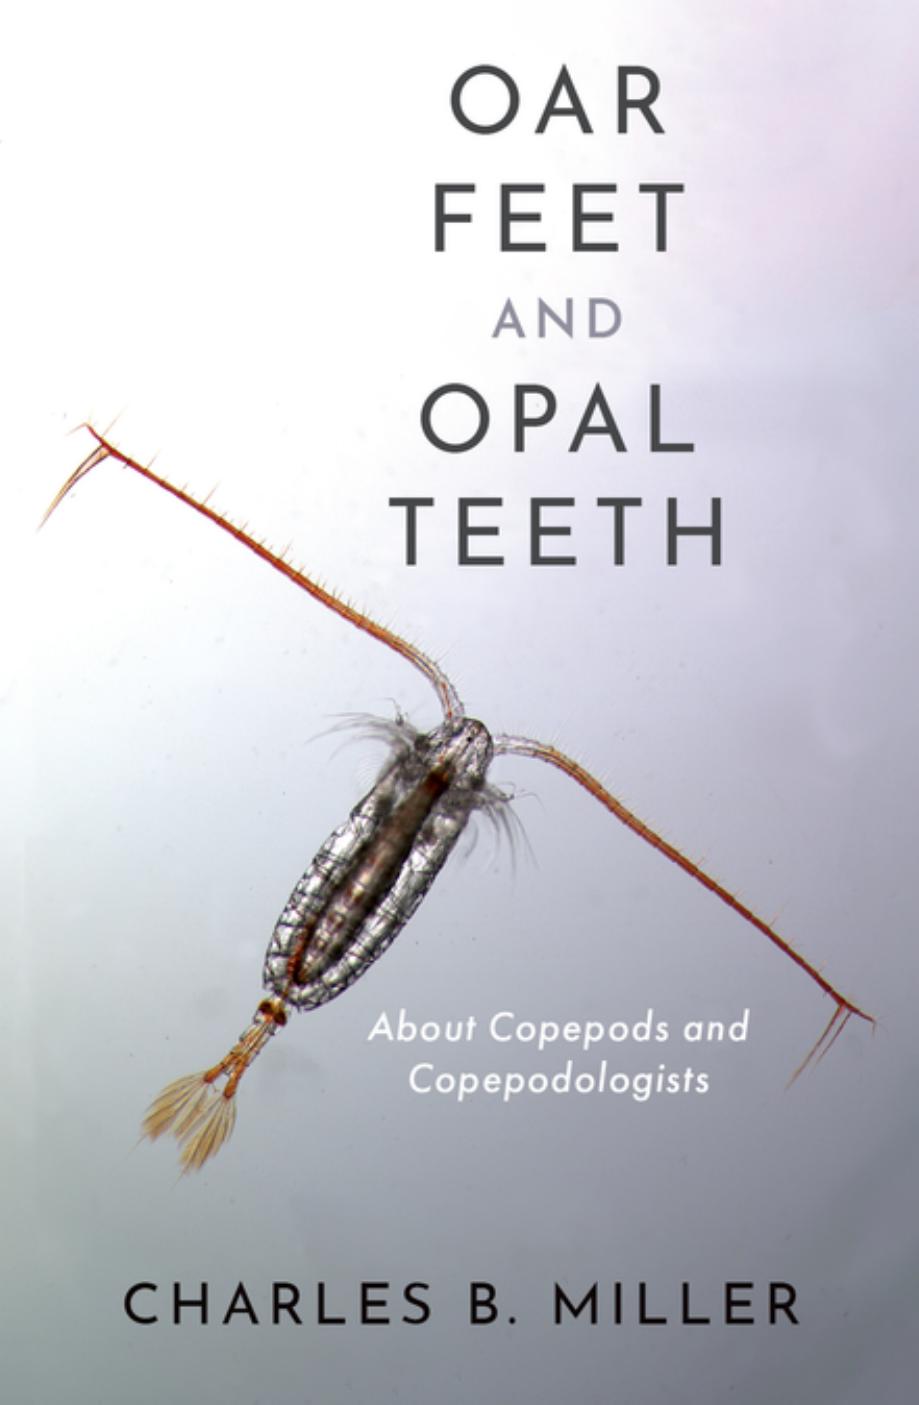 Oar Feet and Opal Teeth: About Copepods and Copepodologists by Charles B. Miller